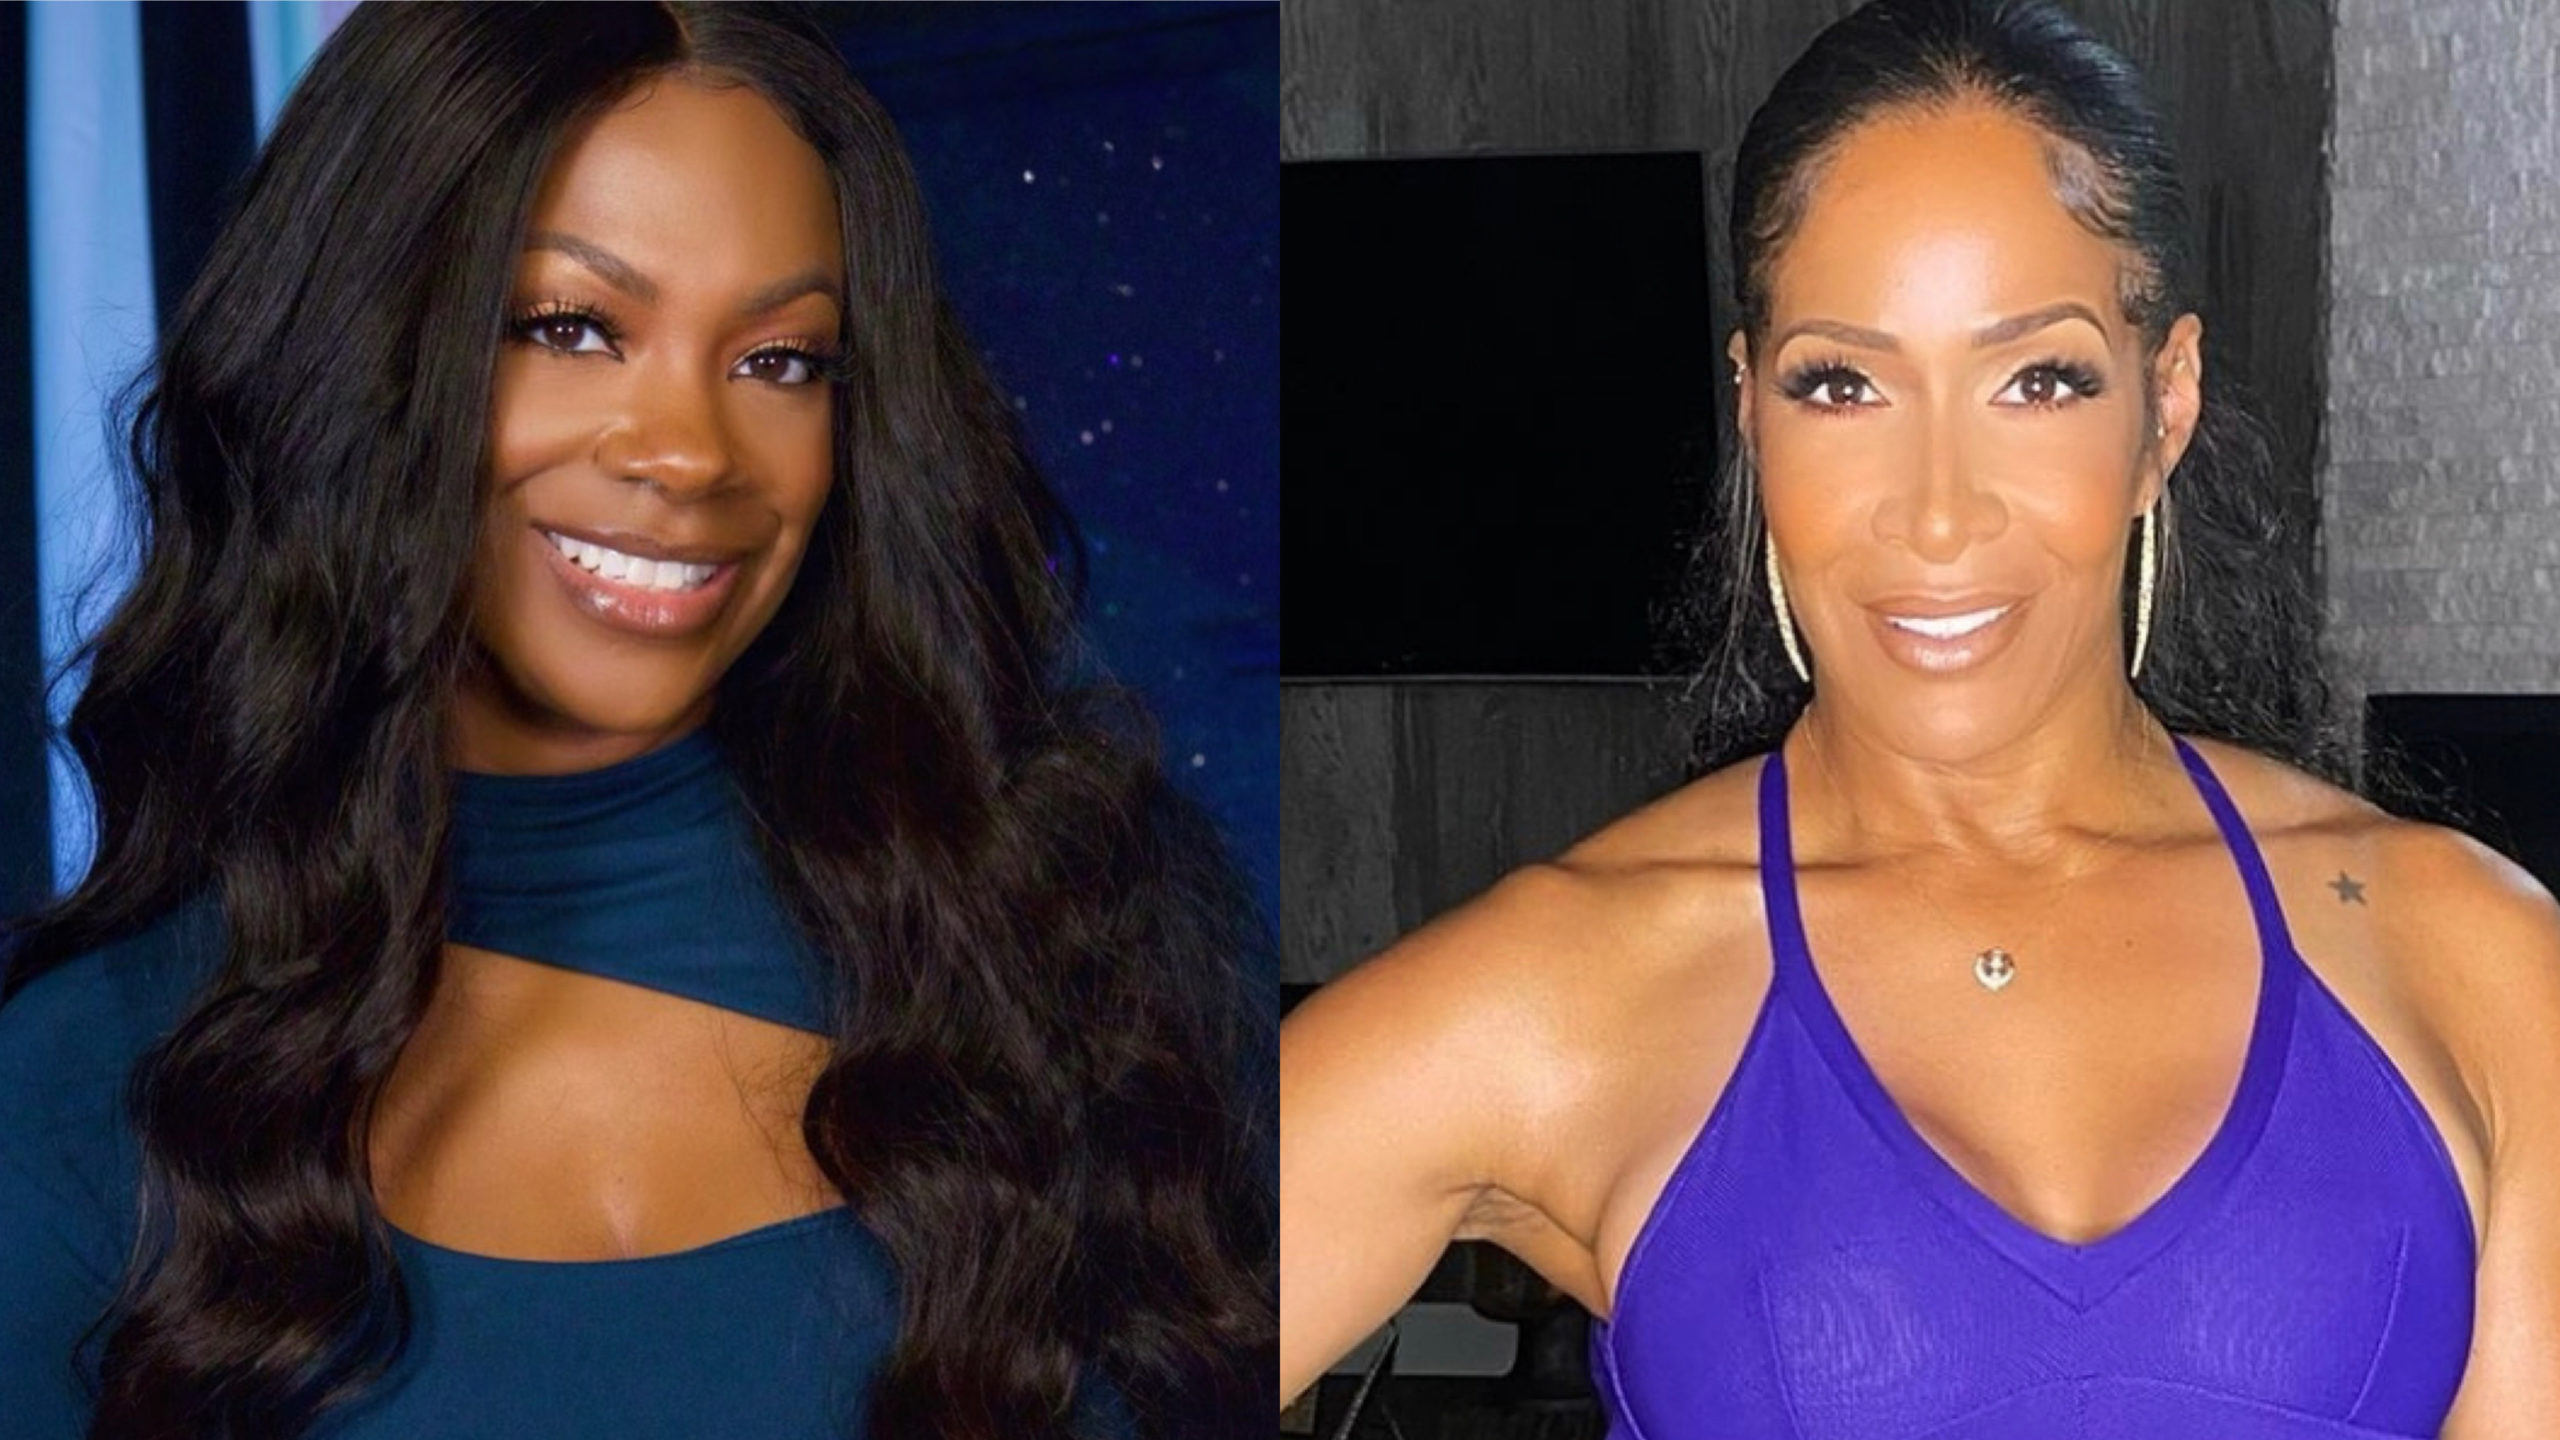 Kandi Burruss Questions Martell Holt's Sincerity In His Newfound Relationship with Sheree Whitfield, Reveals He Dated Another Friend for 'Publicity'